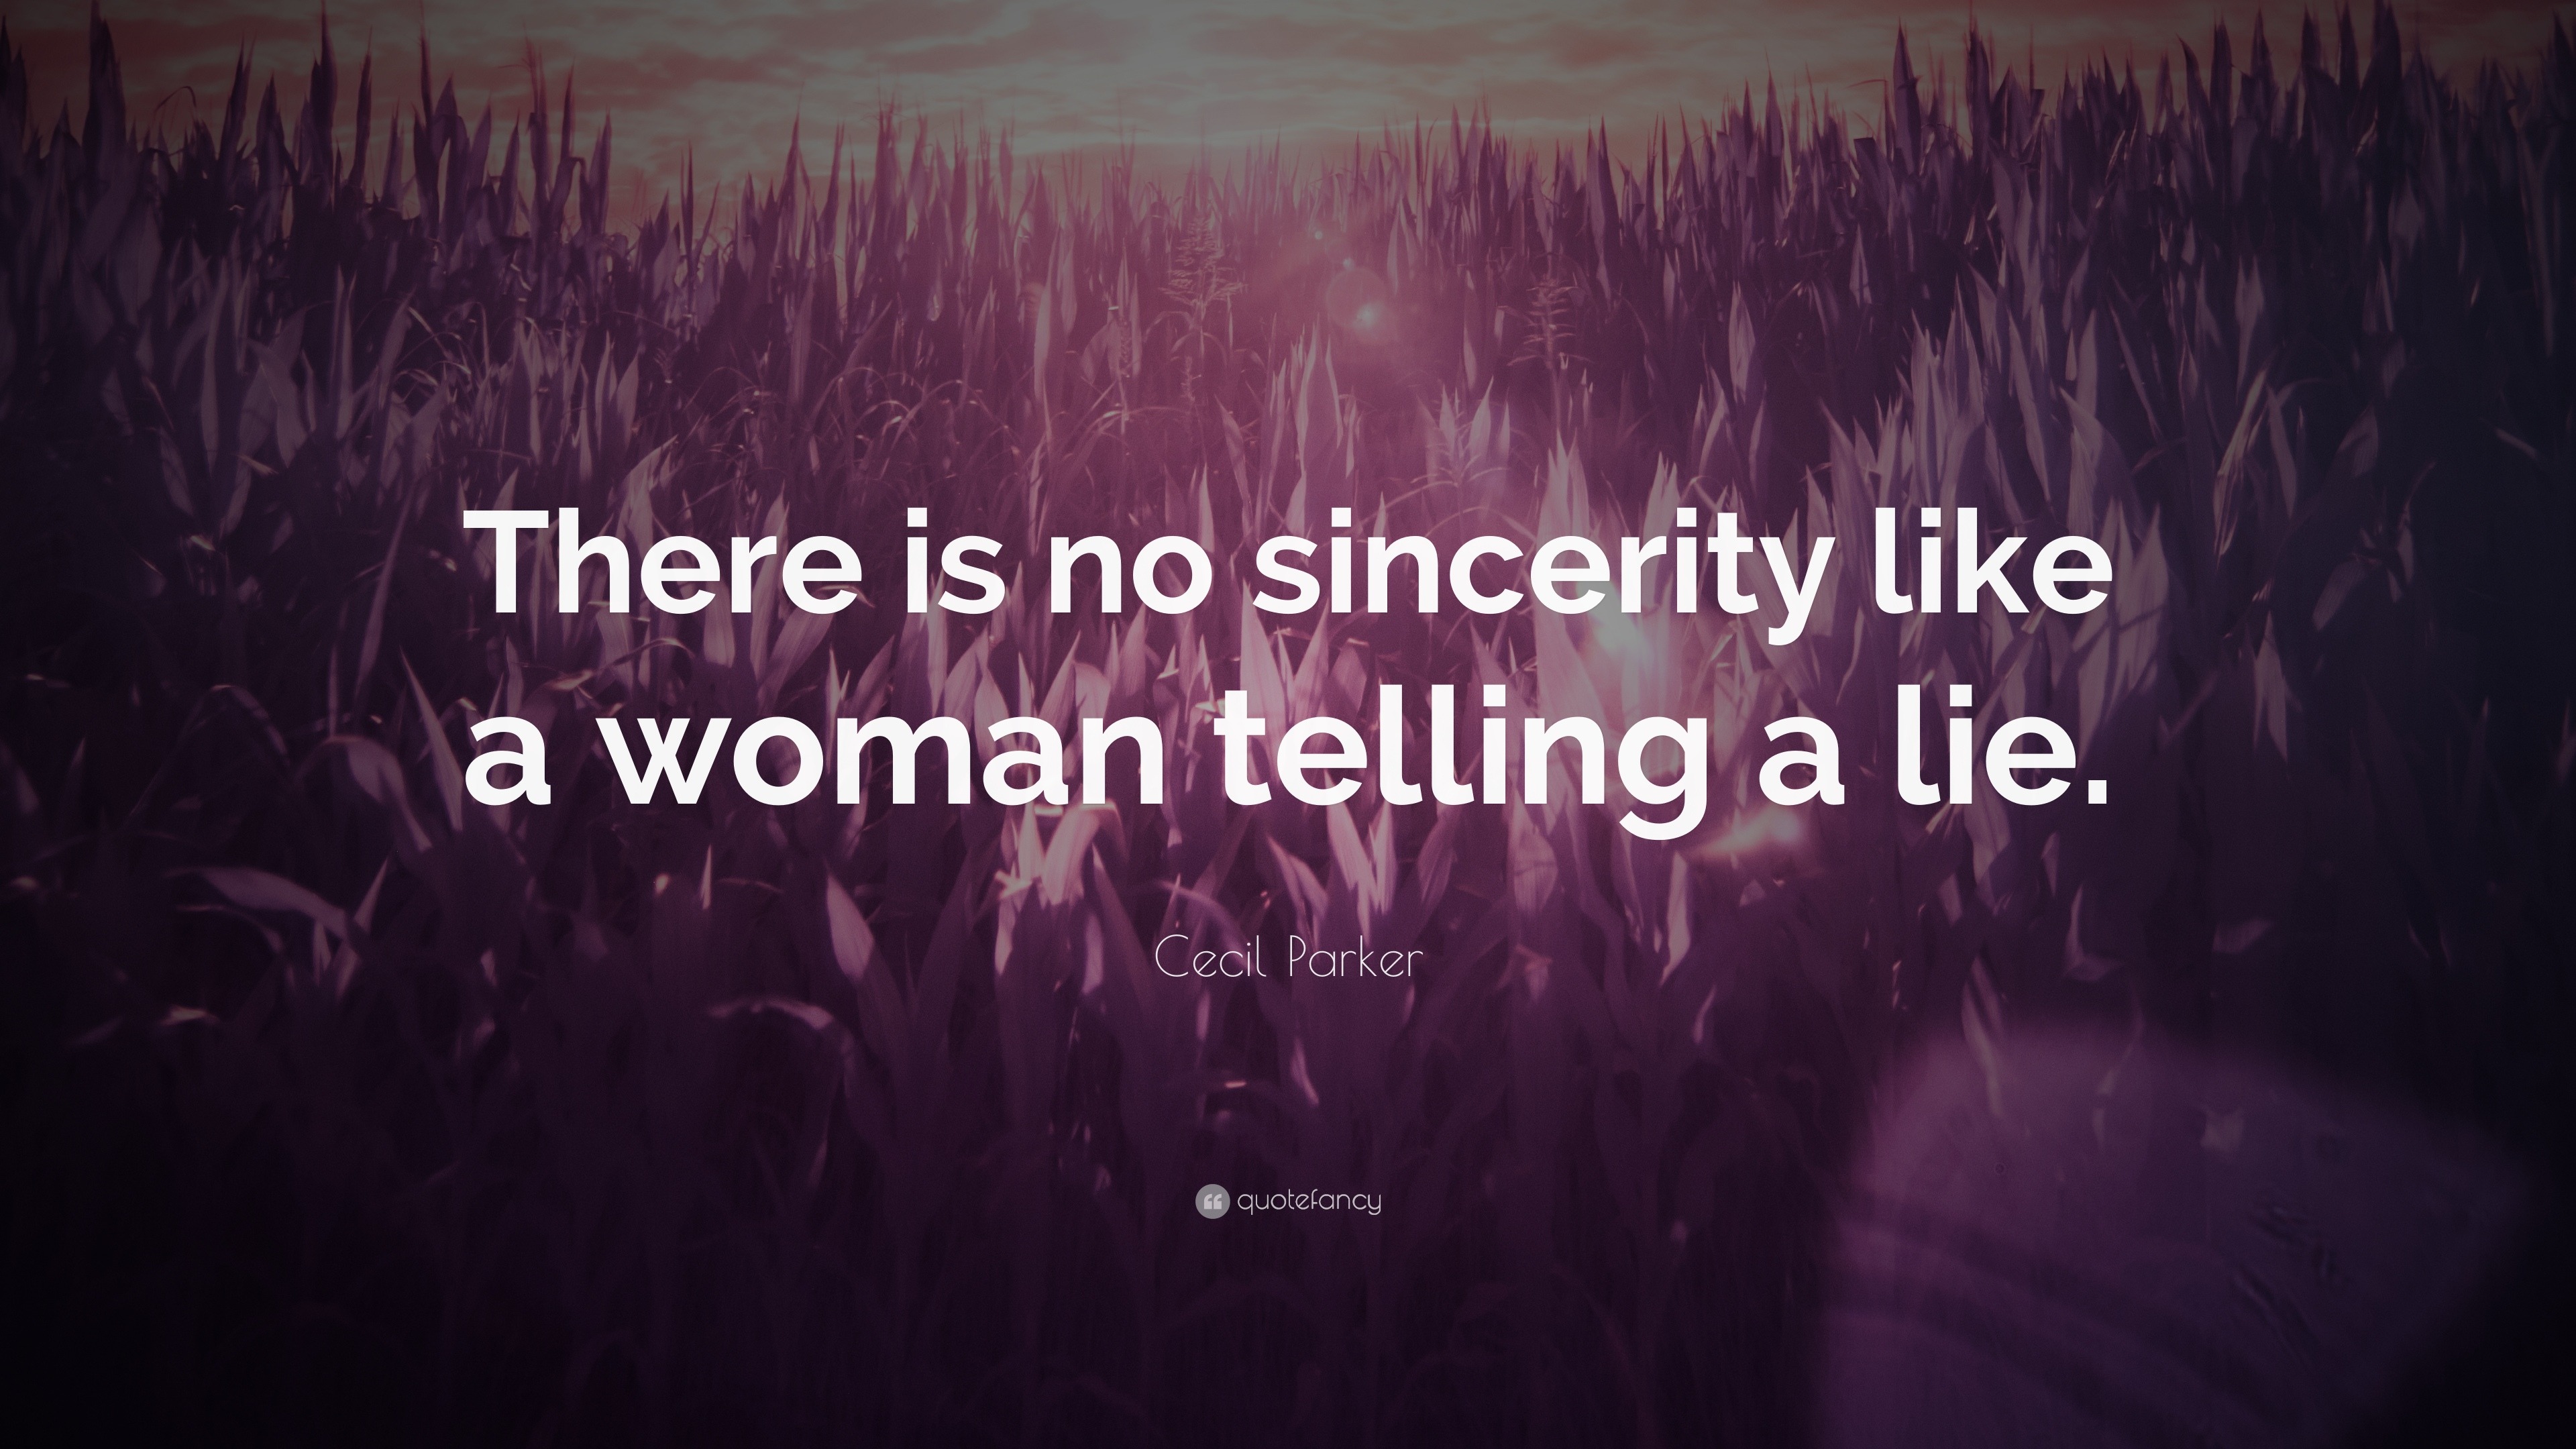 Cecil Parker Quote “There is no sincerity like a woman telling a lie.”